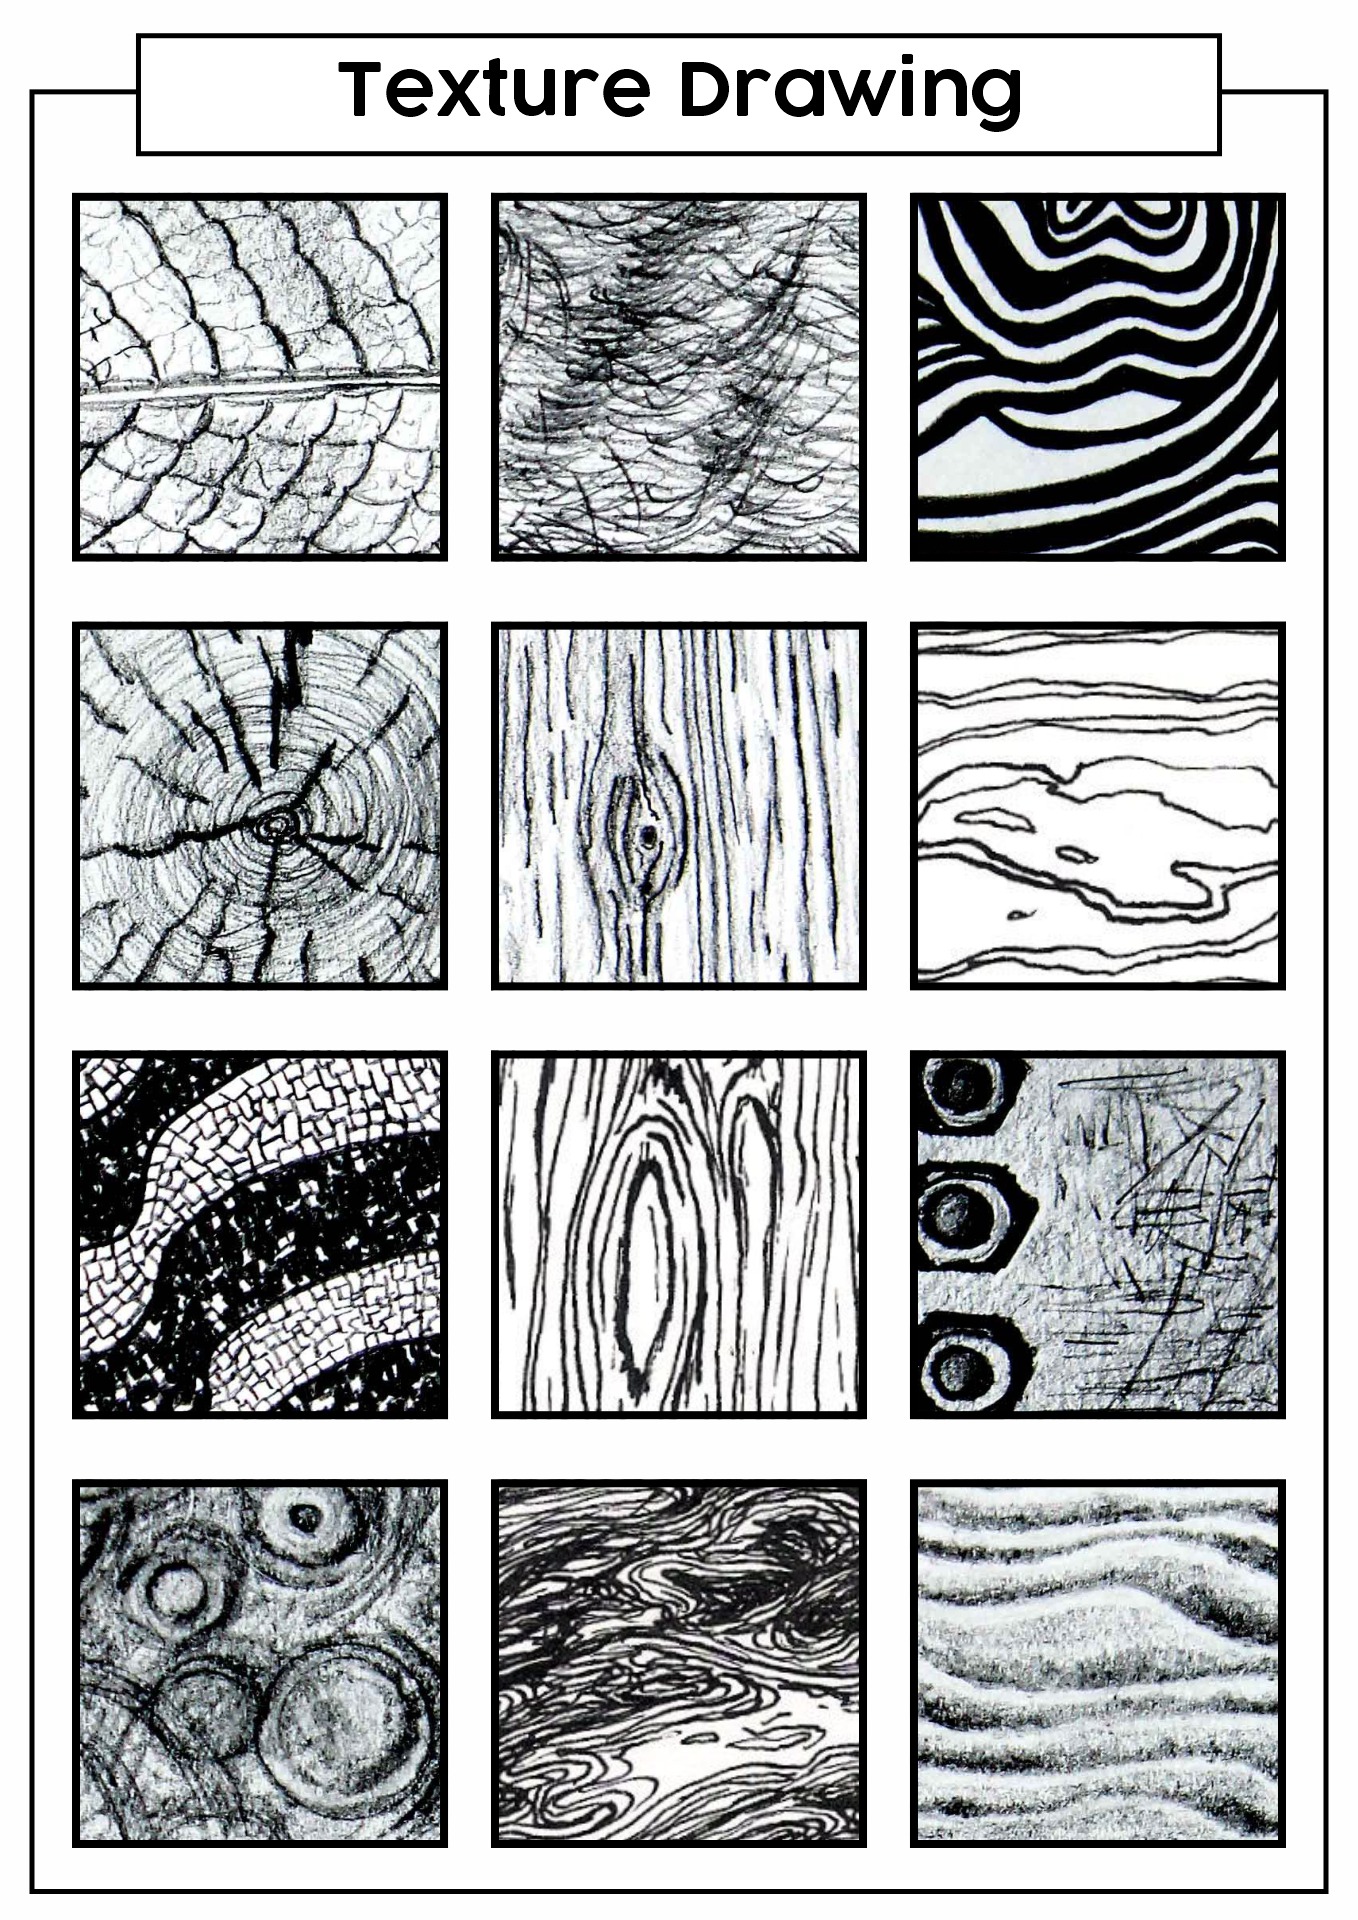 Texture Drawing Examples Image